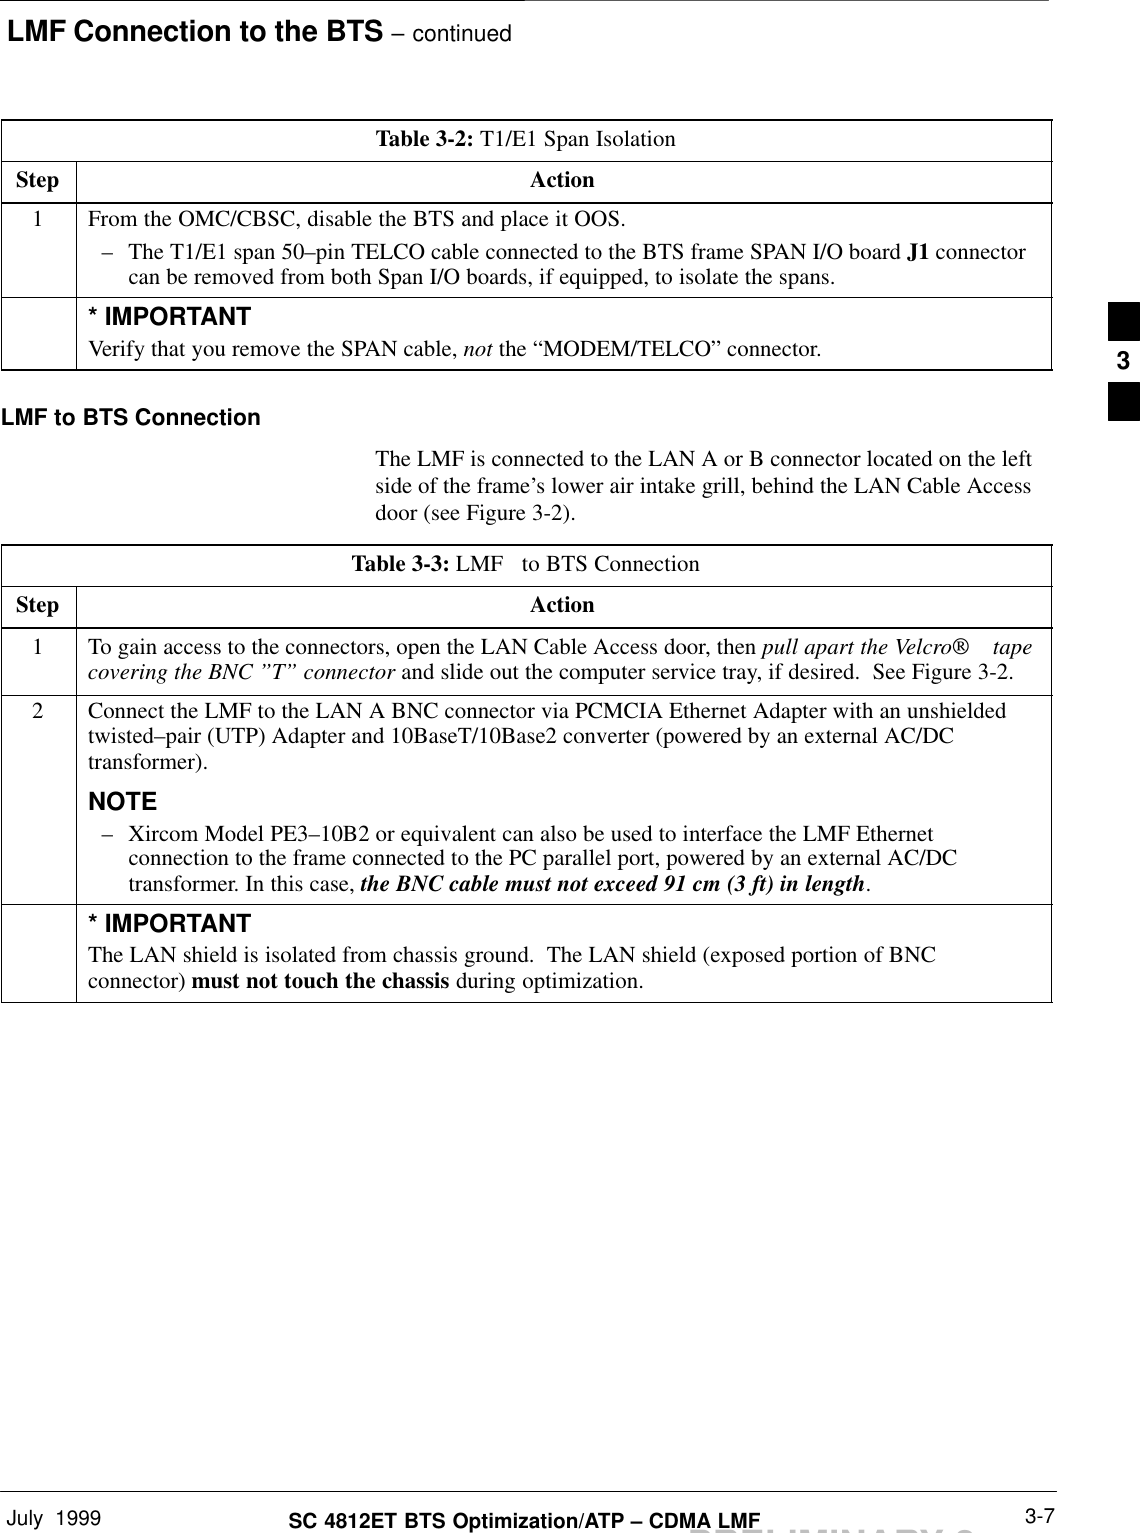 LMF Connection to the BTS – continuedJuly  1999 3-7SC 4812ET BTS Optimization/ATP – CDMA LMFPRELIMINARY 2Table 3-2: T1/E1 Span IsolationStep Action1From the OMC/CBSC, disable the BTS and place it OOS.– The T1/E1 span 50–pin TELCO cable connected to the BTS frame SPAN I/O board J1 connectorcan be removed from both Span I/O boards, if equipped, to isolate the spans.* IMPORTANTVerify that you remove the SPAN cable, not the “MODEM/TELCO” connector.LMF to BTS ConnectionThe LMF is connected to the LAN A or B connector located on the leftside of the frame’s lower air intake grill, behind the LAN Cable Accessdoor (see Figure 3-2).Table 3-3: LMF   to BTS ConnectionStep Action1To gain access to the connectors, open the LAN Cable Access door, then pull apart the Velcro tapecovering the BNC ”T” connector and slide out the computer service tray, if desired.  See Figure 3-2.2Connect the LMF to the LAN A BNC connector via PCMCIA Ethernet Adapter with an unshieldedtwisted–pair (UTP) Adapter and 10BaseT/10Base2 converter (powered by an external AC/DCtransformer).NOTE– Xircom Model PE3–10B2 or equivalent can also be used to interface the LMF Ethernetconnection to the frame connected to the PC parallel port, powered by an external AC/DCtransformer. In this case, the BNC cable must not exceed 91 cm (3 ft) in length.* IMPORTANTThe LAN shield is isolated from chassis ground.  The LAN shield (exposed portion of BNCconnector) must not touch the chassis during optimization.3